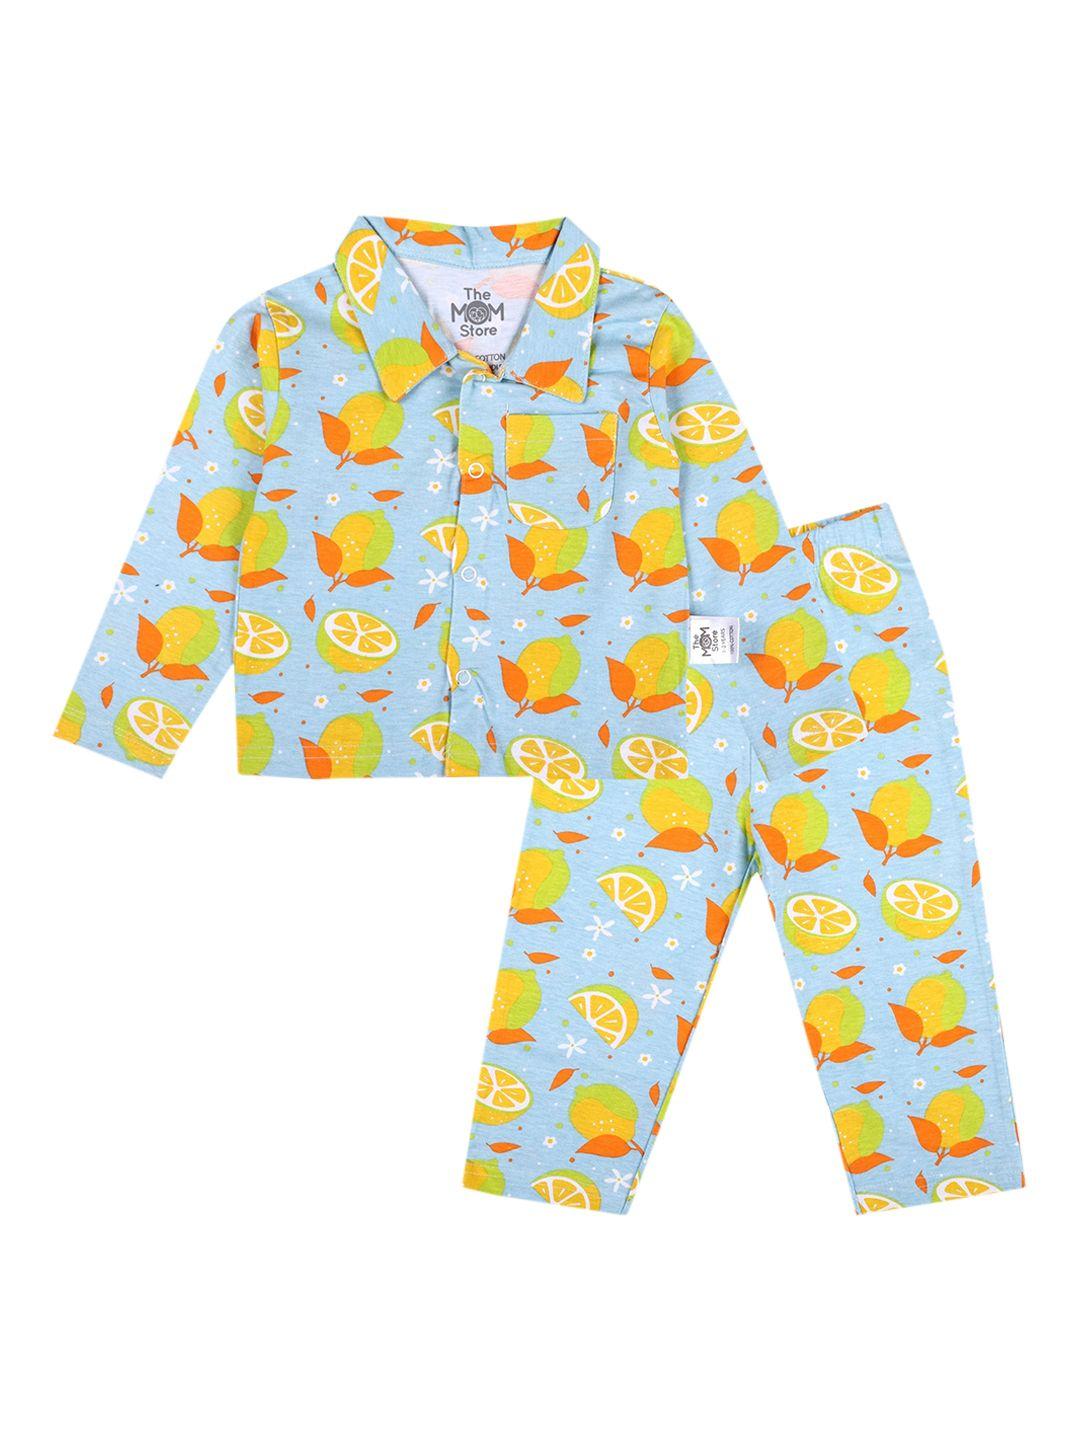 the mom store unisex kids blue & green printed night suit